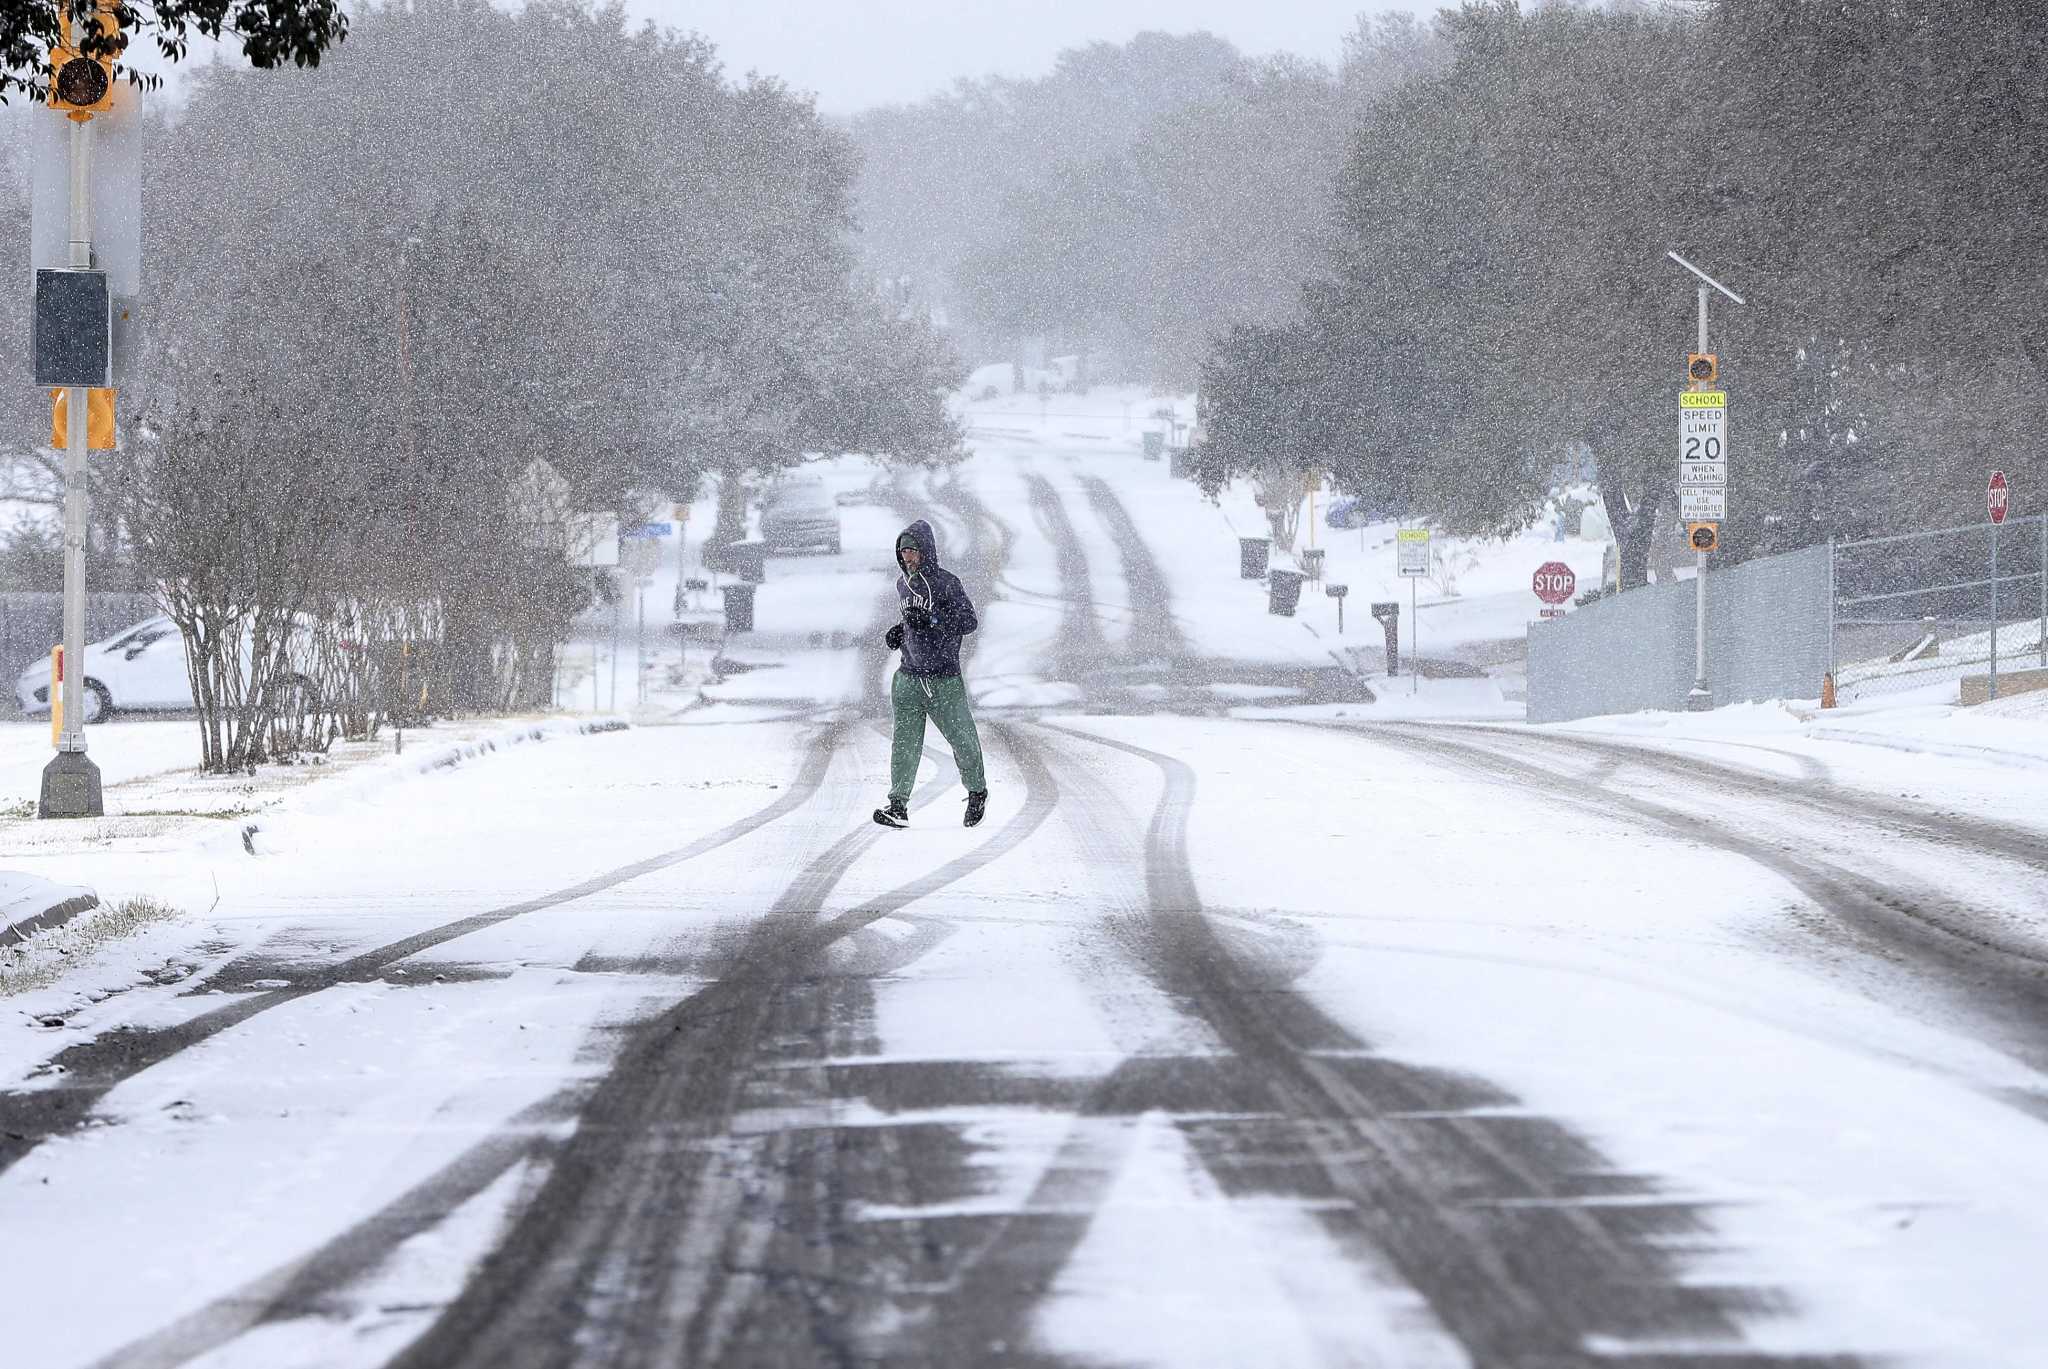 Texas might see another winter storm, says 2022 Farmers' Almanac